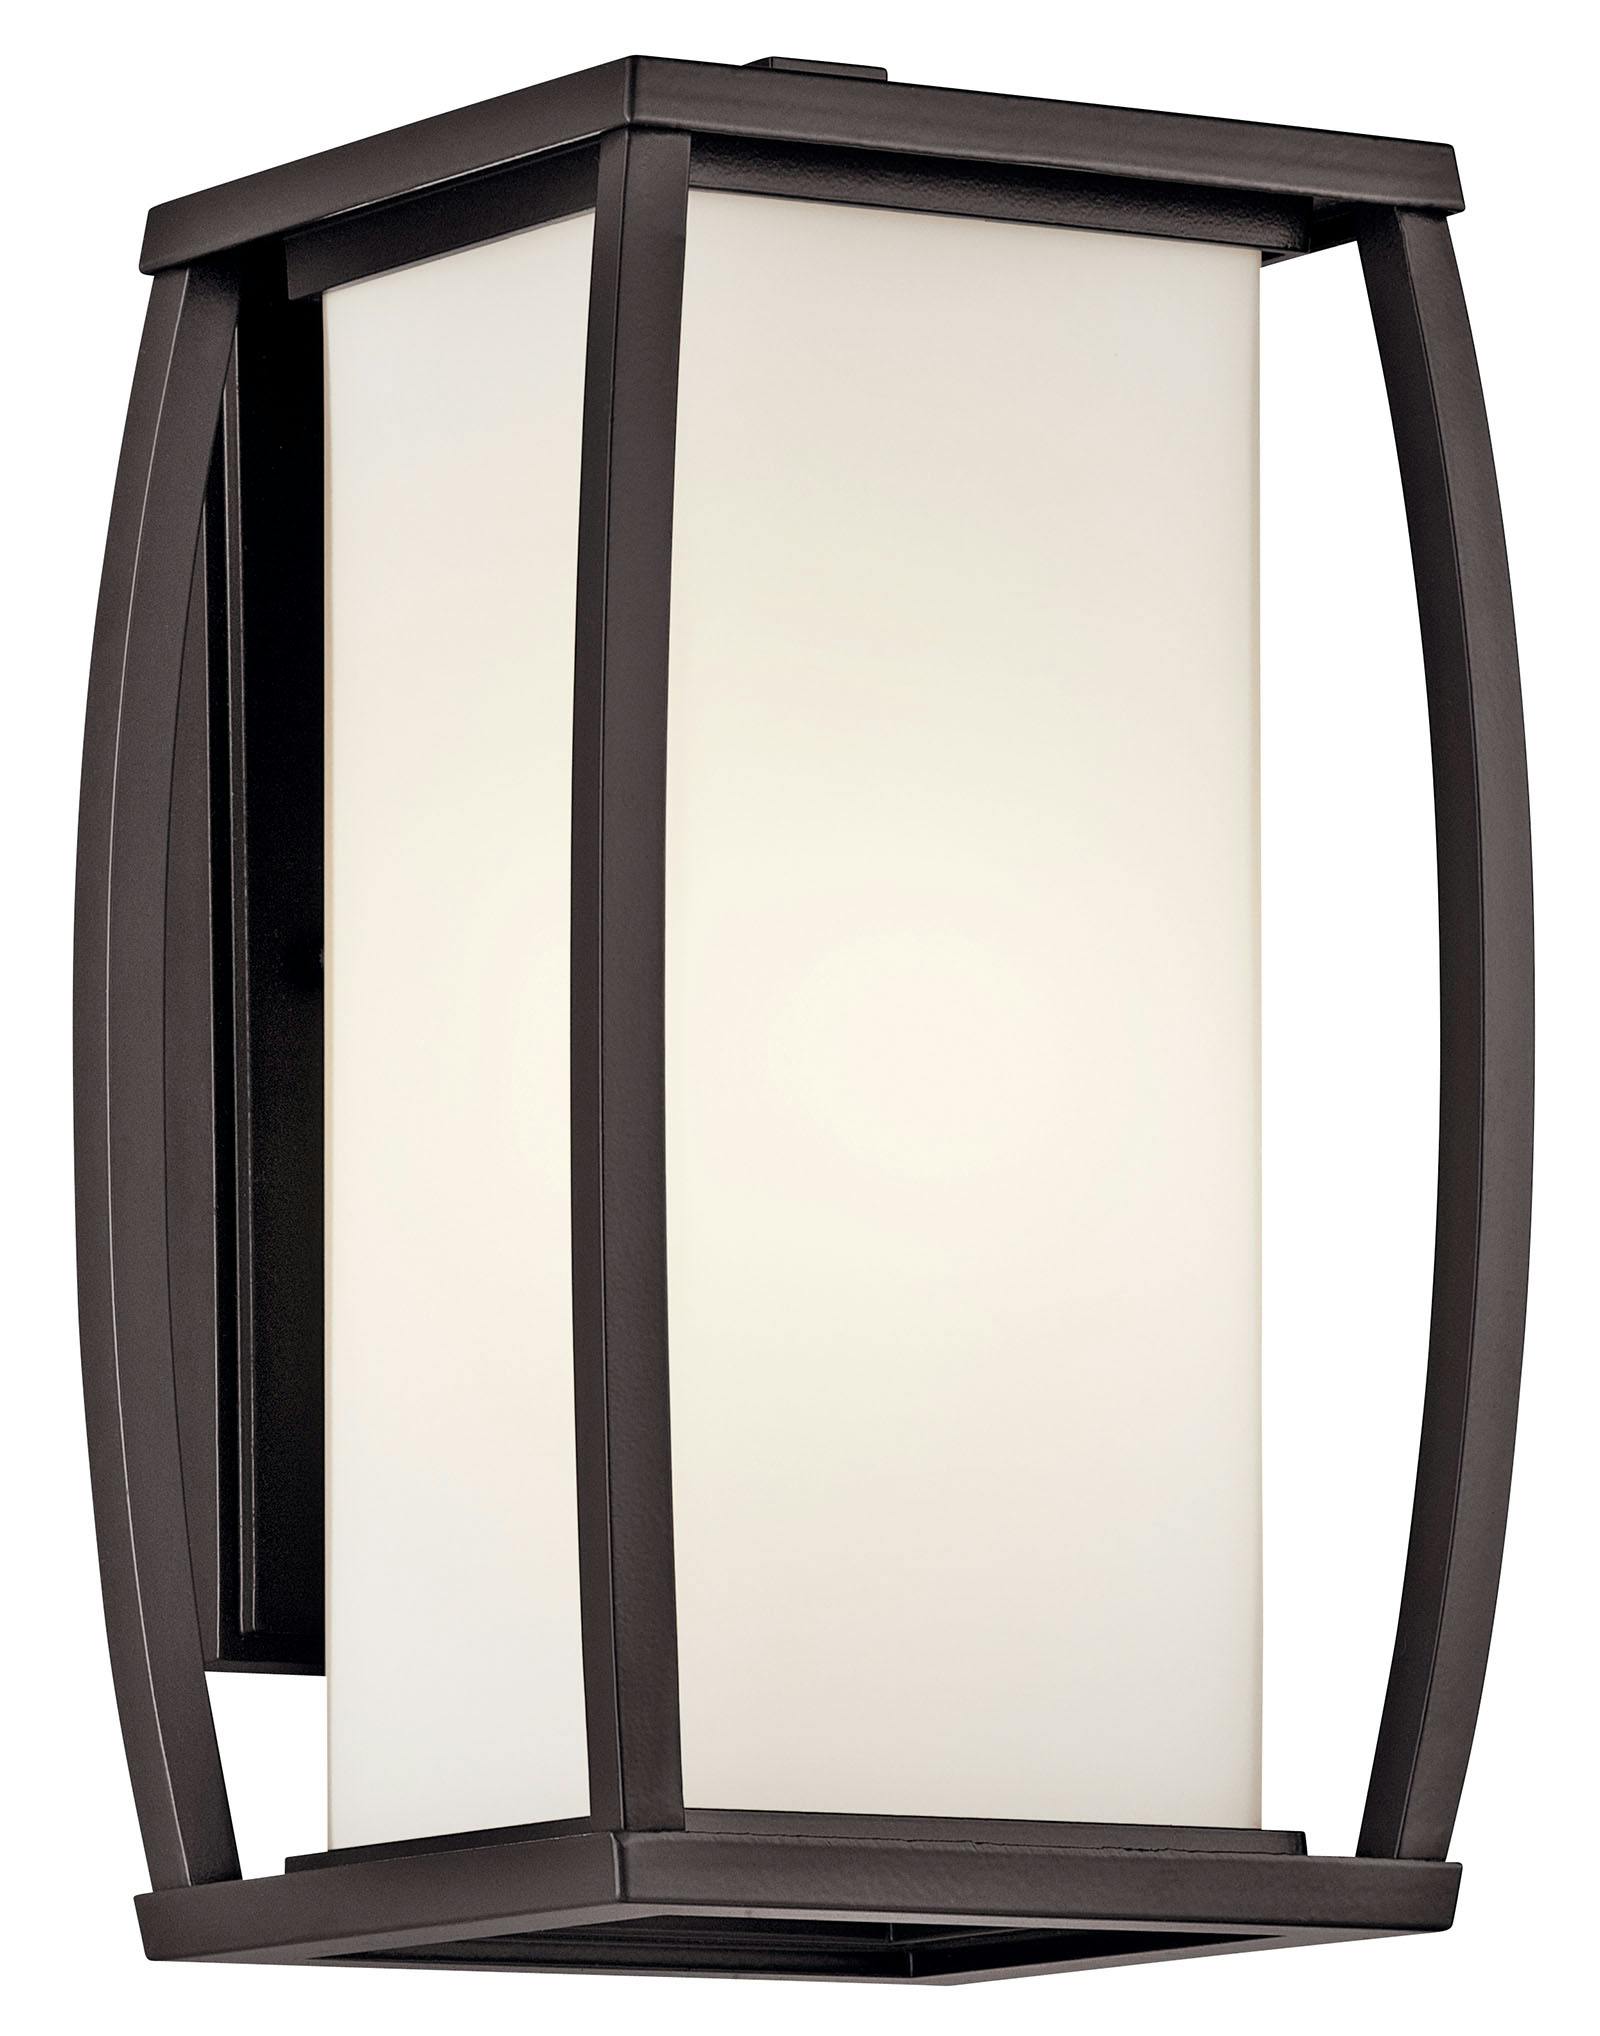 Bowen 13" Wall Light in a Bronze finish on a white background